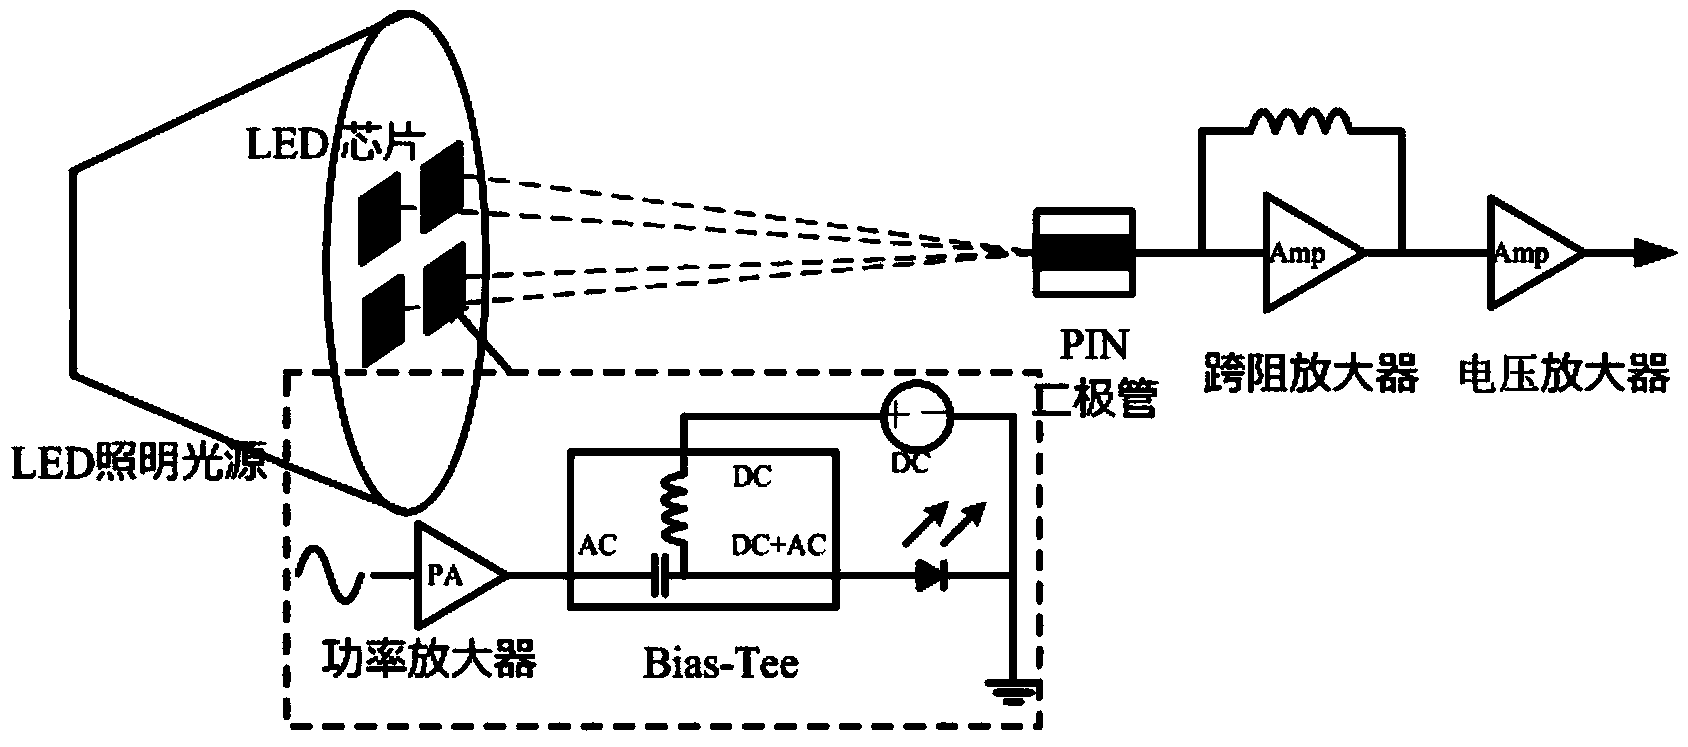 LED array visible light communication system and method